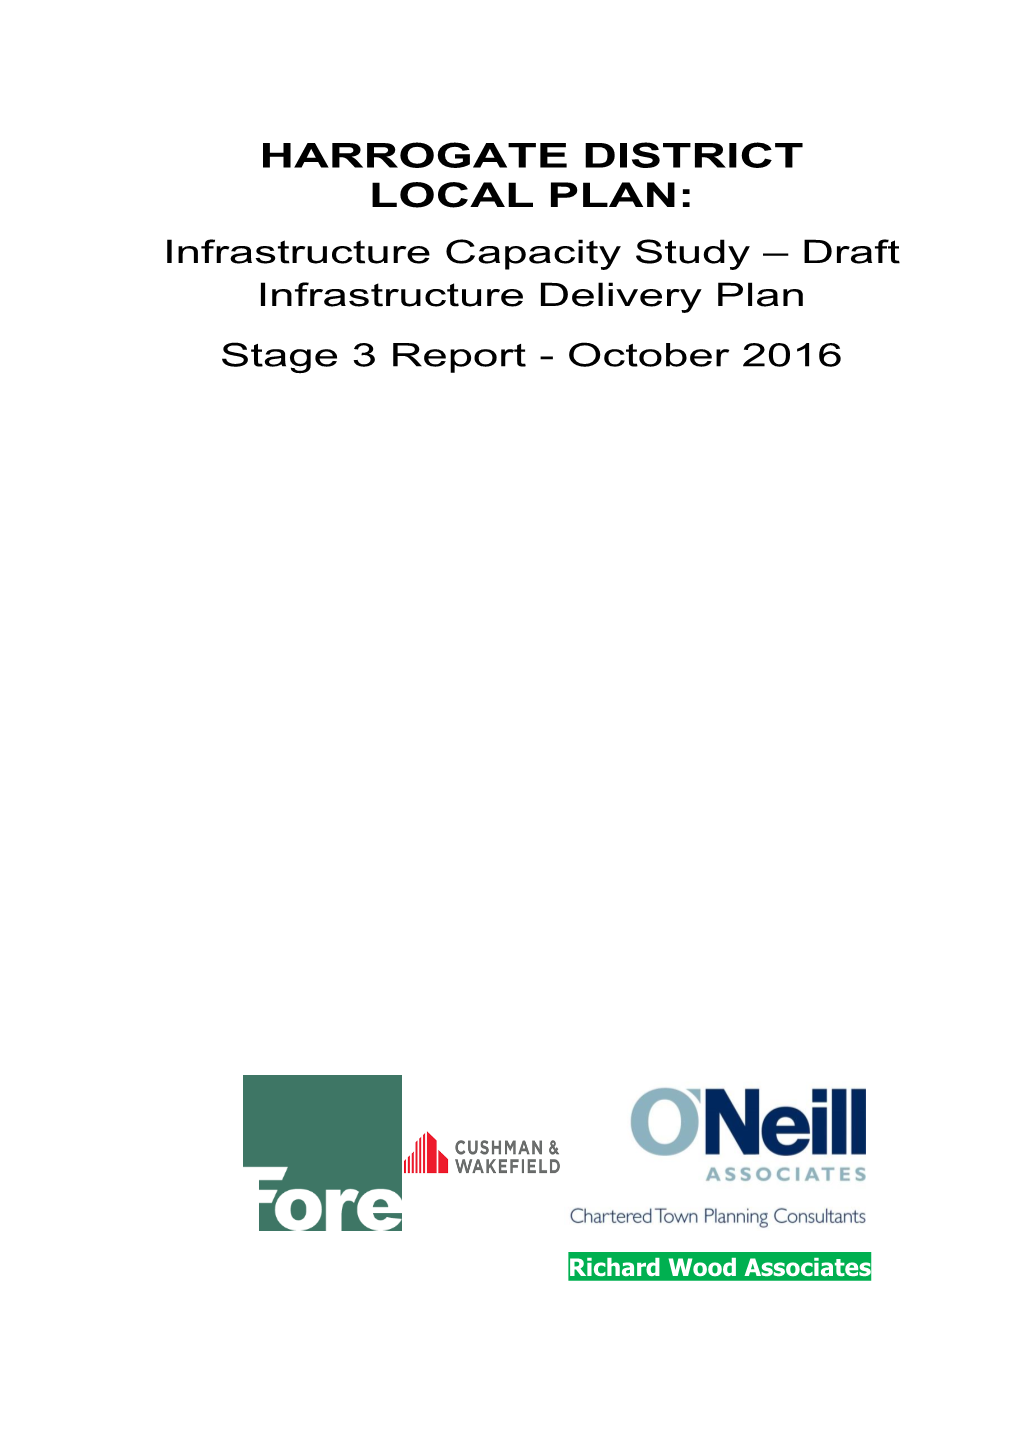 Infrastructure Capacity Study – Draft Infrastructure Delivery Plan